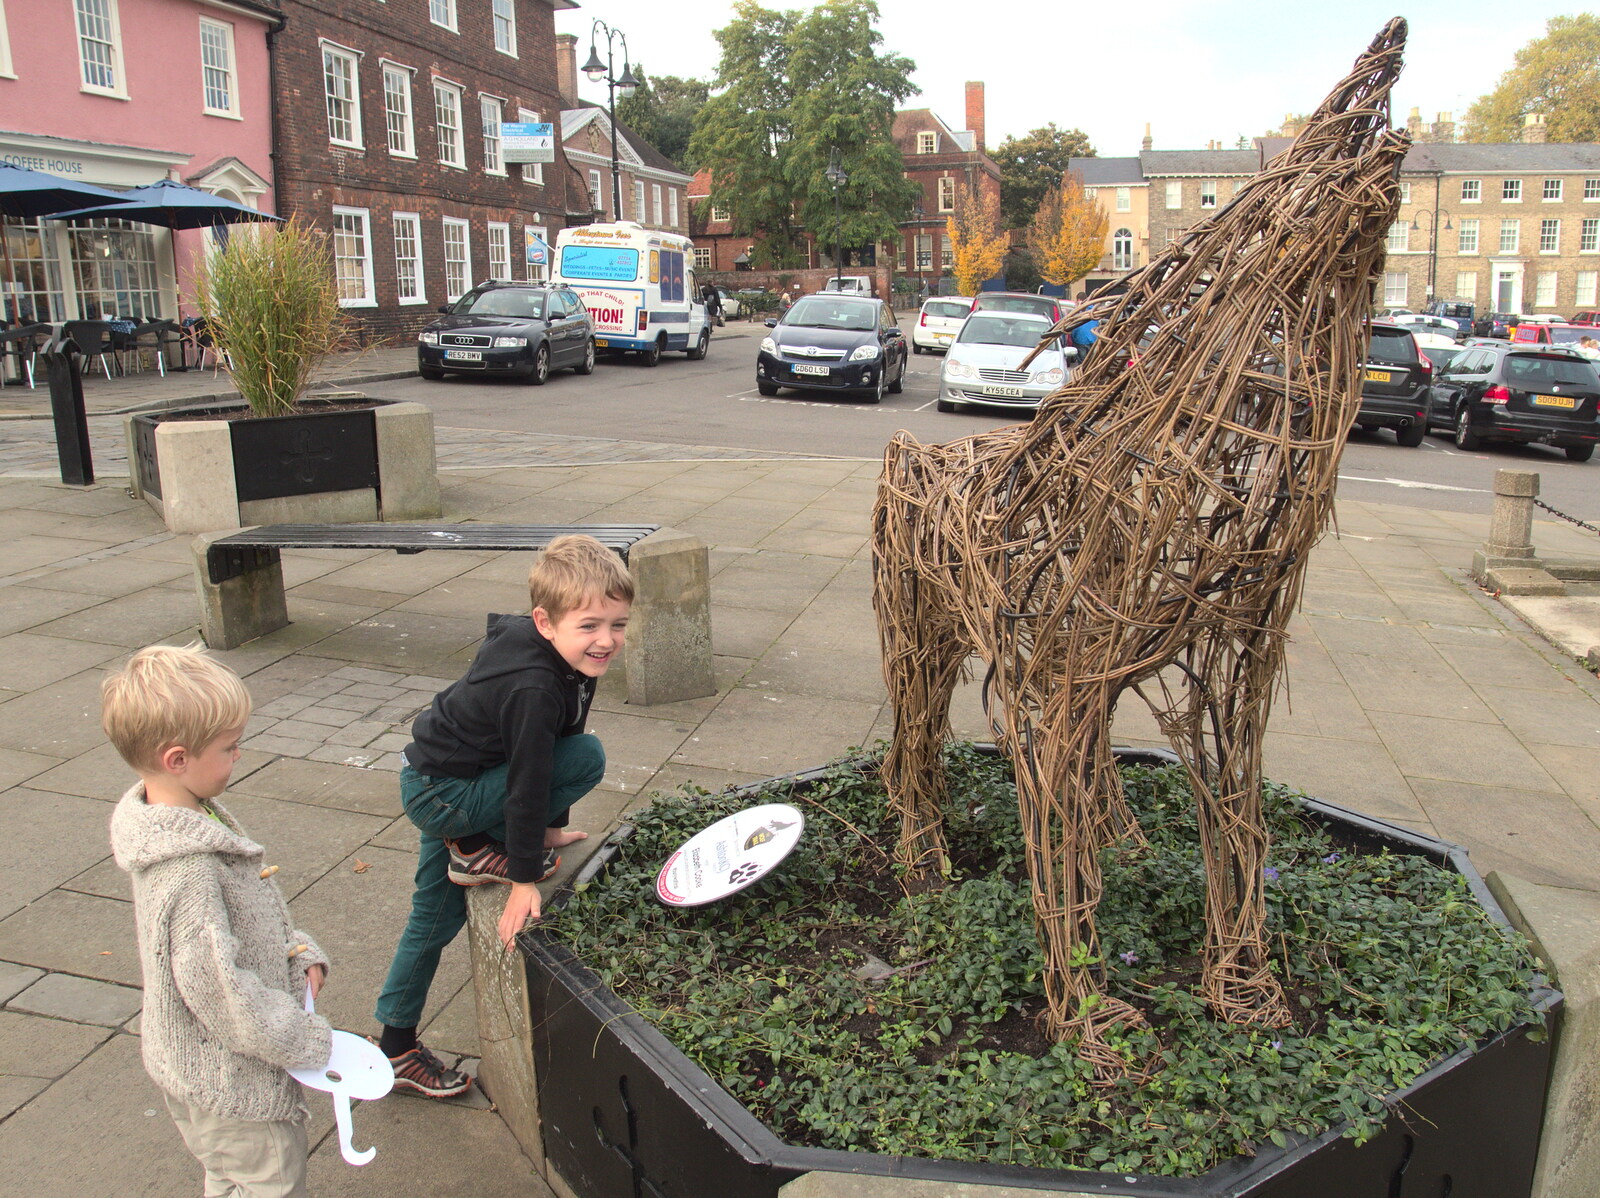 There are a load of wolves scattered around Bury from Abbey Gardens in Autumn, Bury St. Edmunds, Suffolk - 27th October 2015